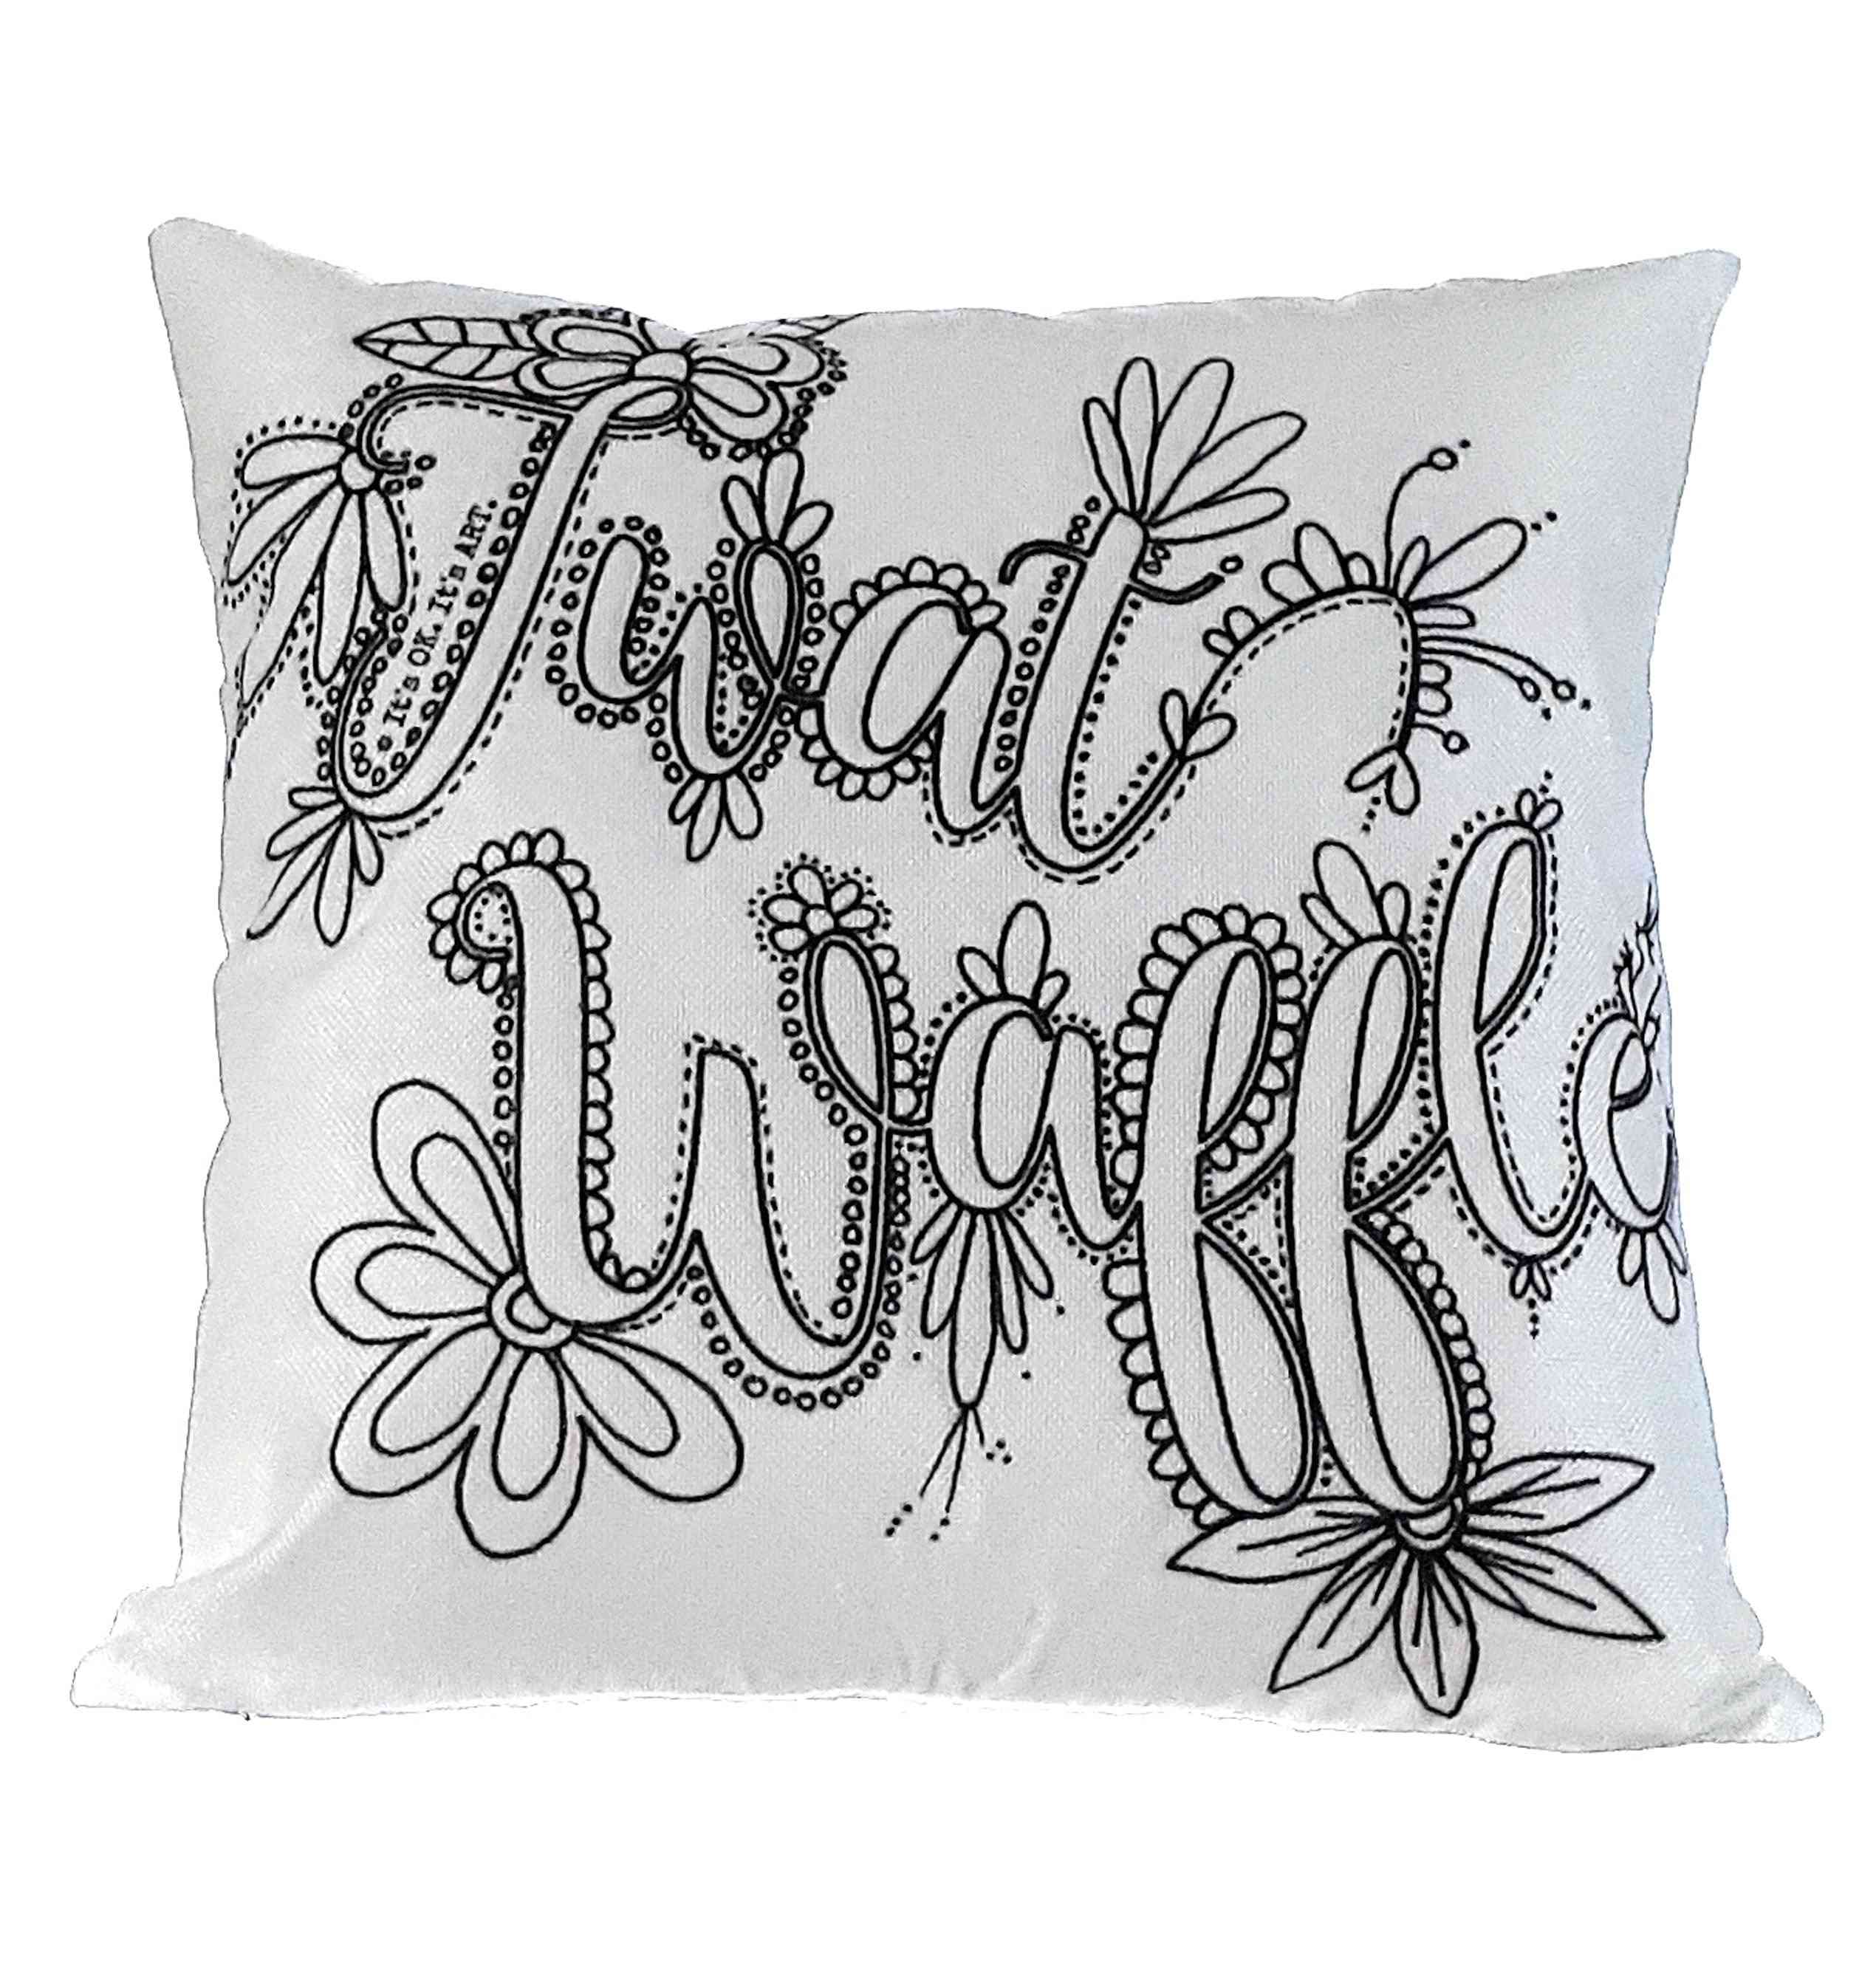 Twat Waffle Pillow Cover